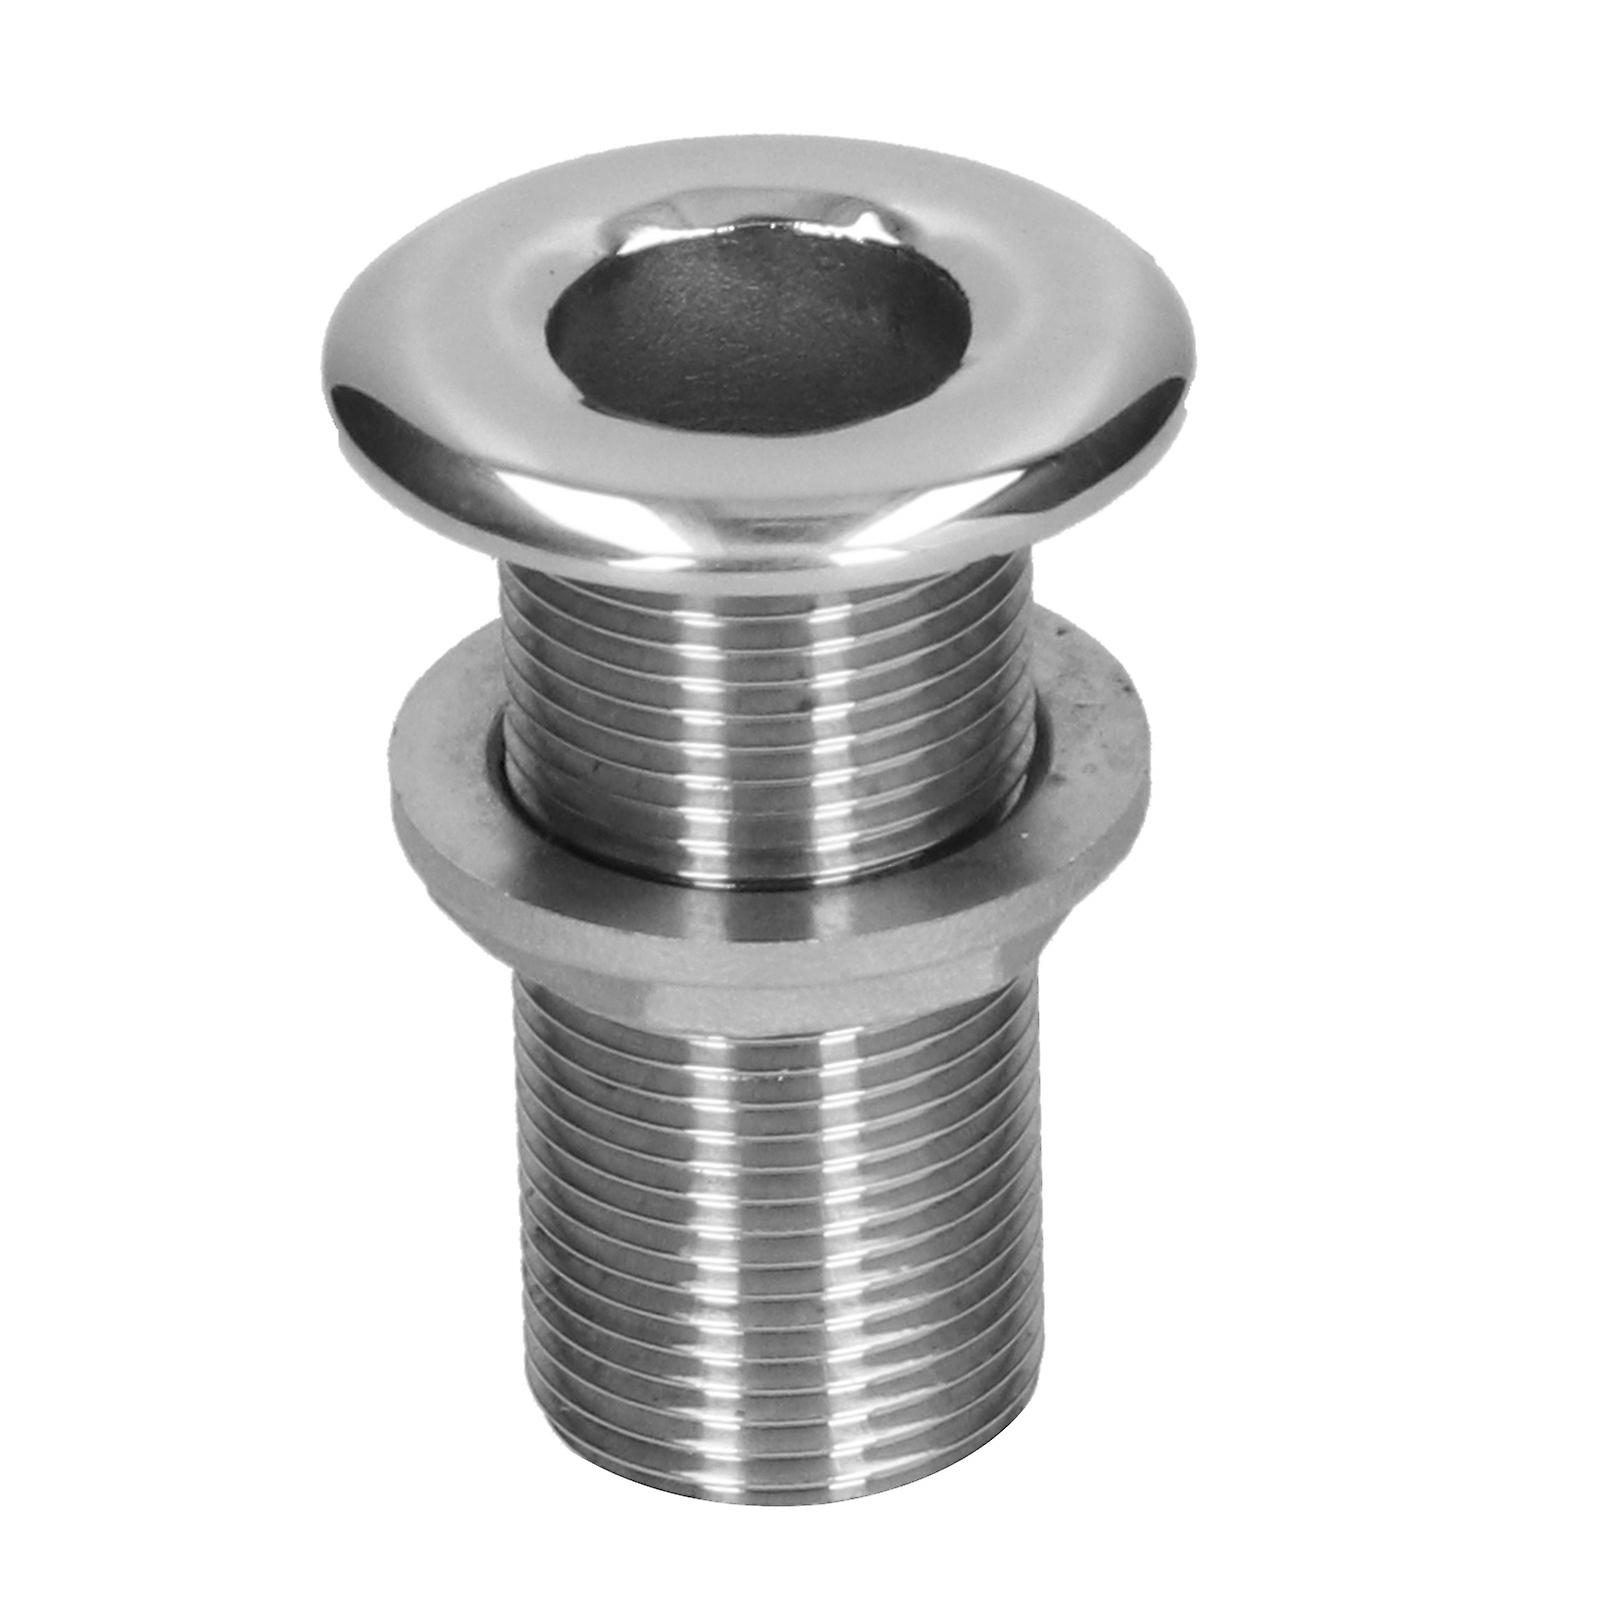 1in Thru Hull Fitting Connector 316 Stainless Steel Water Drain Outlet For Marine Boats Yacht